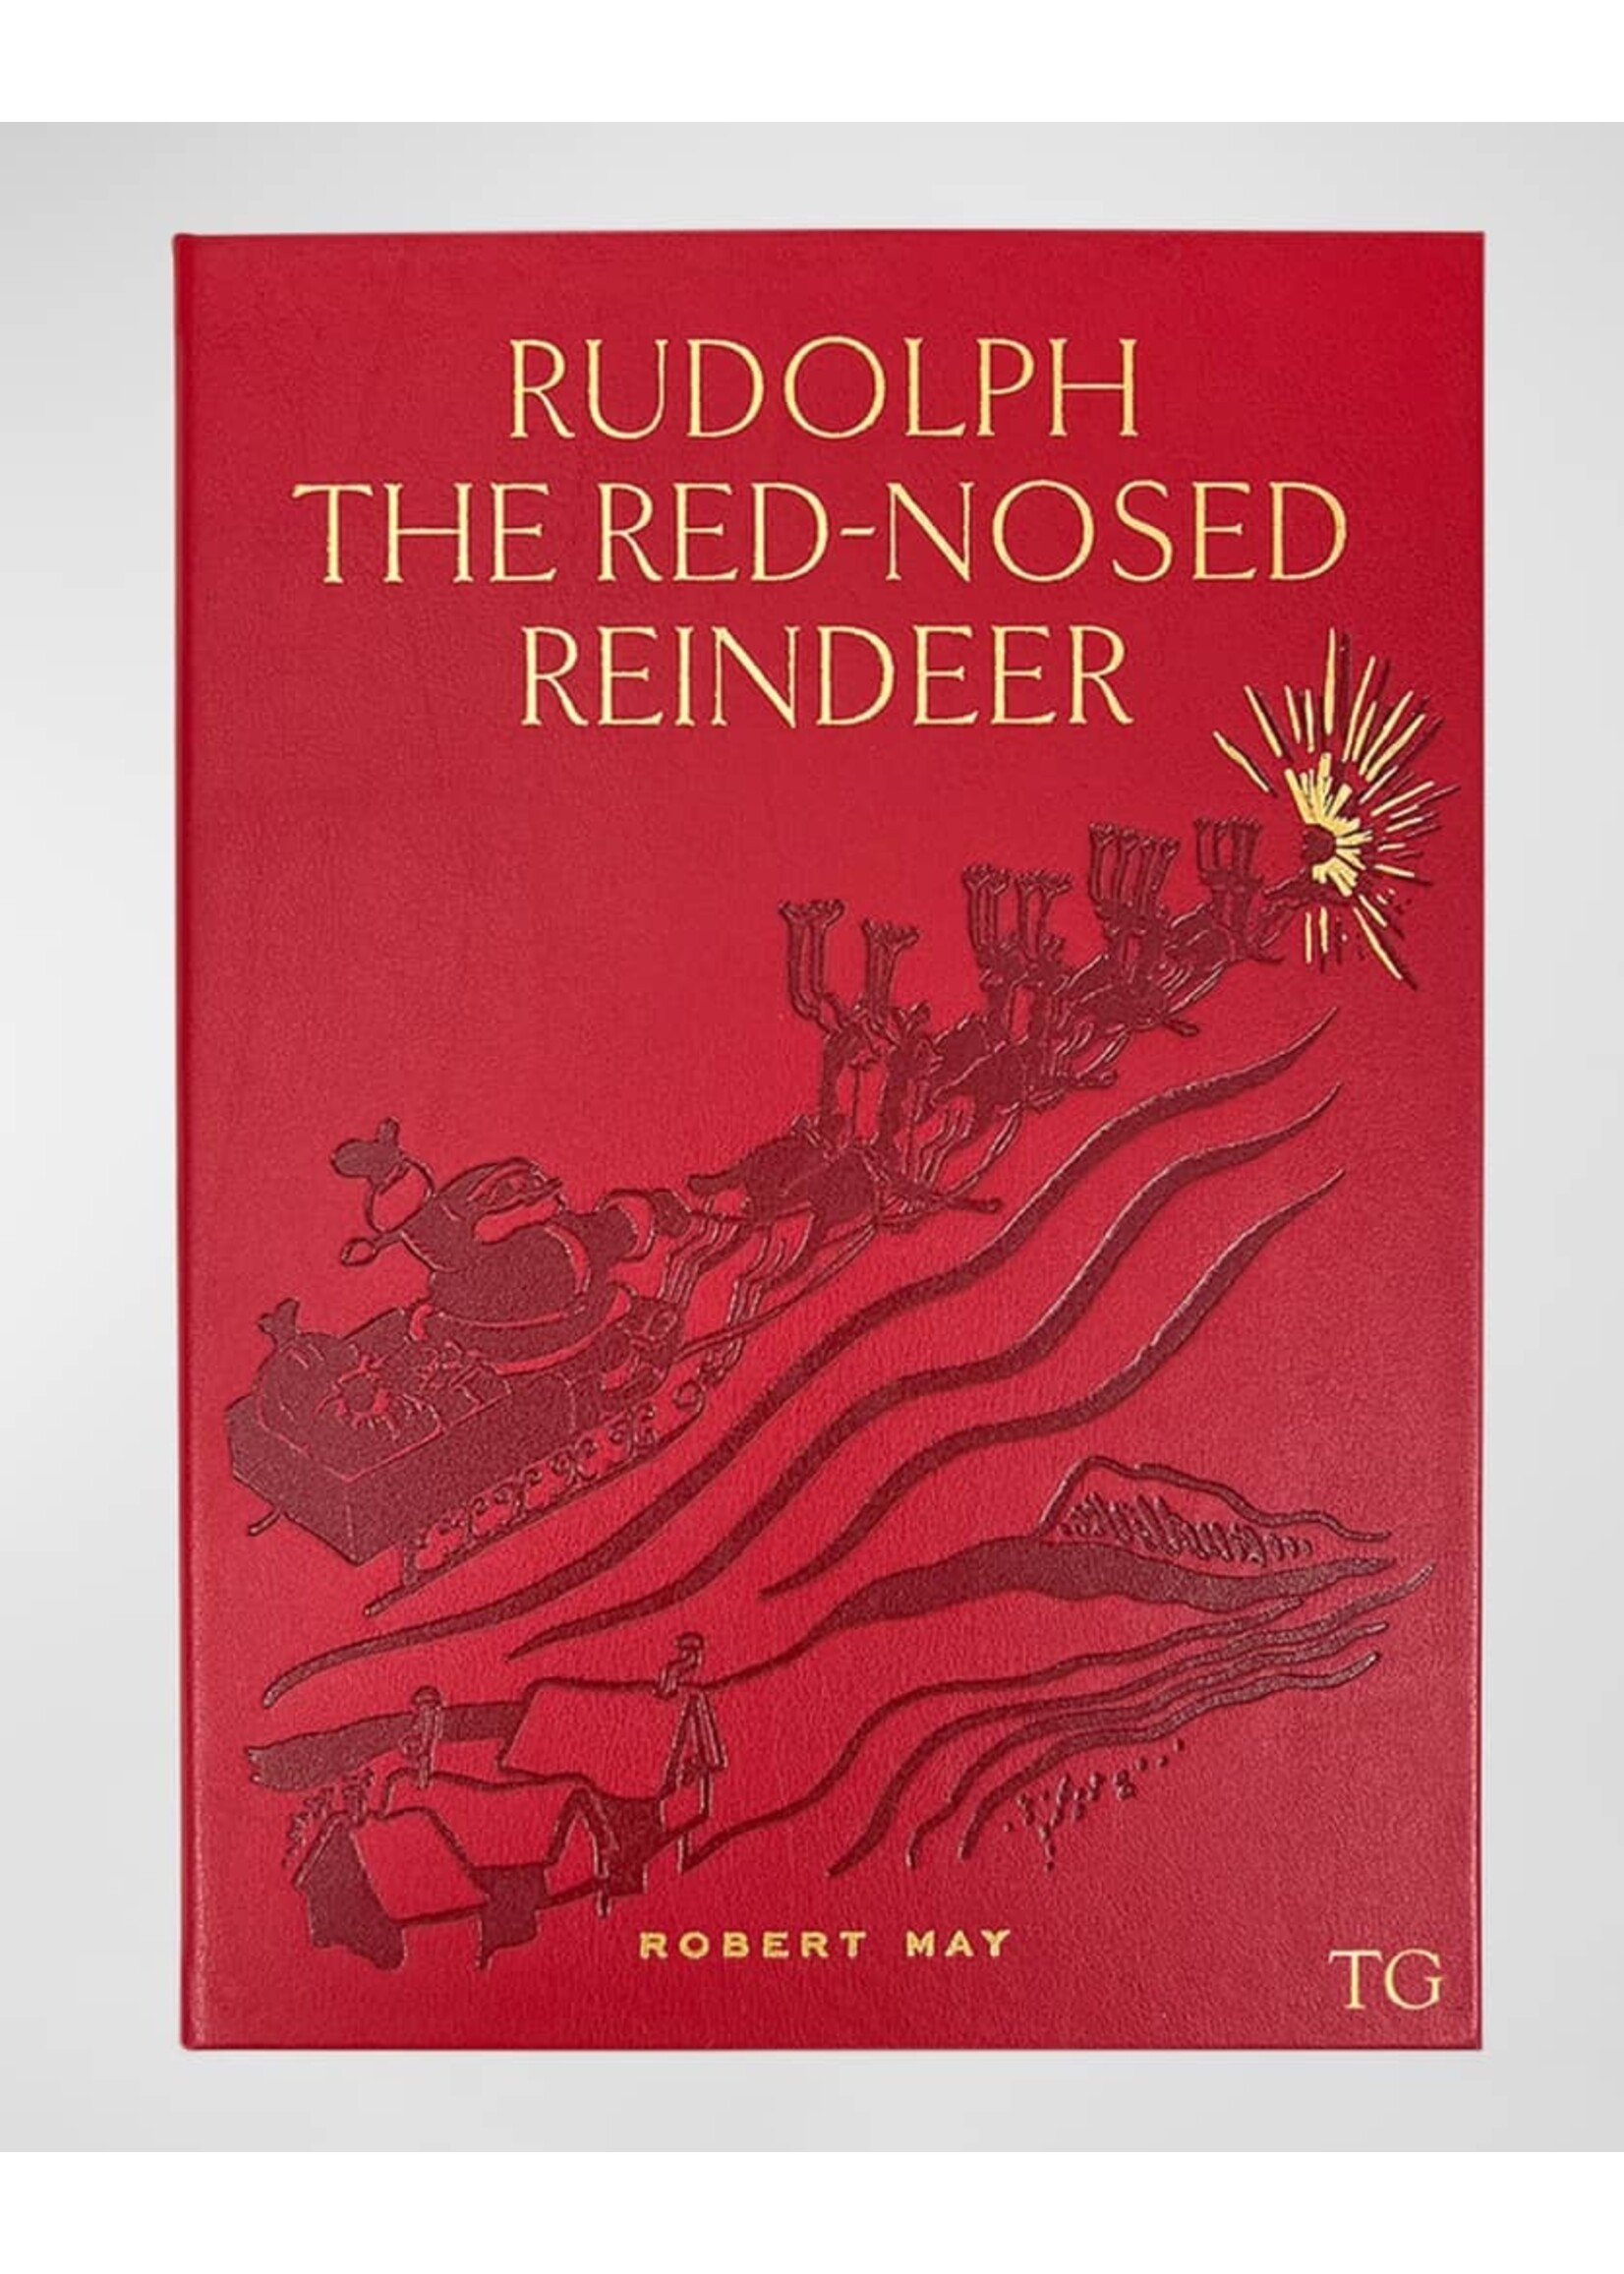 Book - Rudolph the Red Nose Reindeer